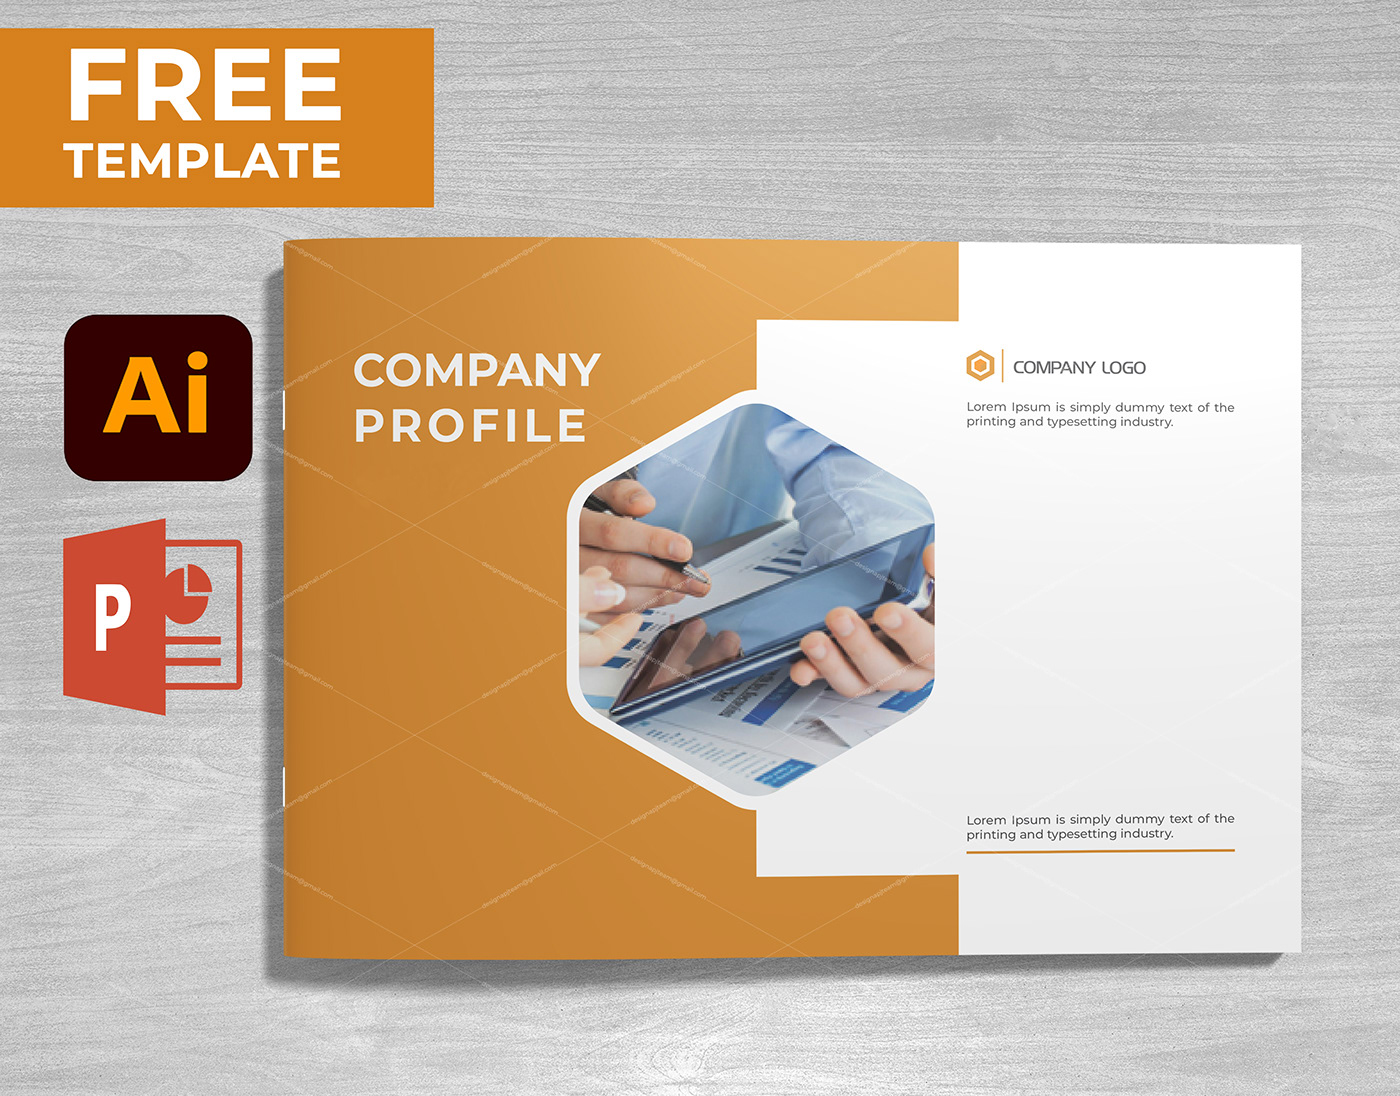 Company Profile Brochure Free Template Download On Behance